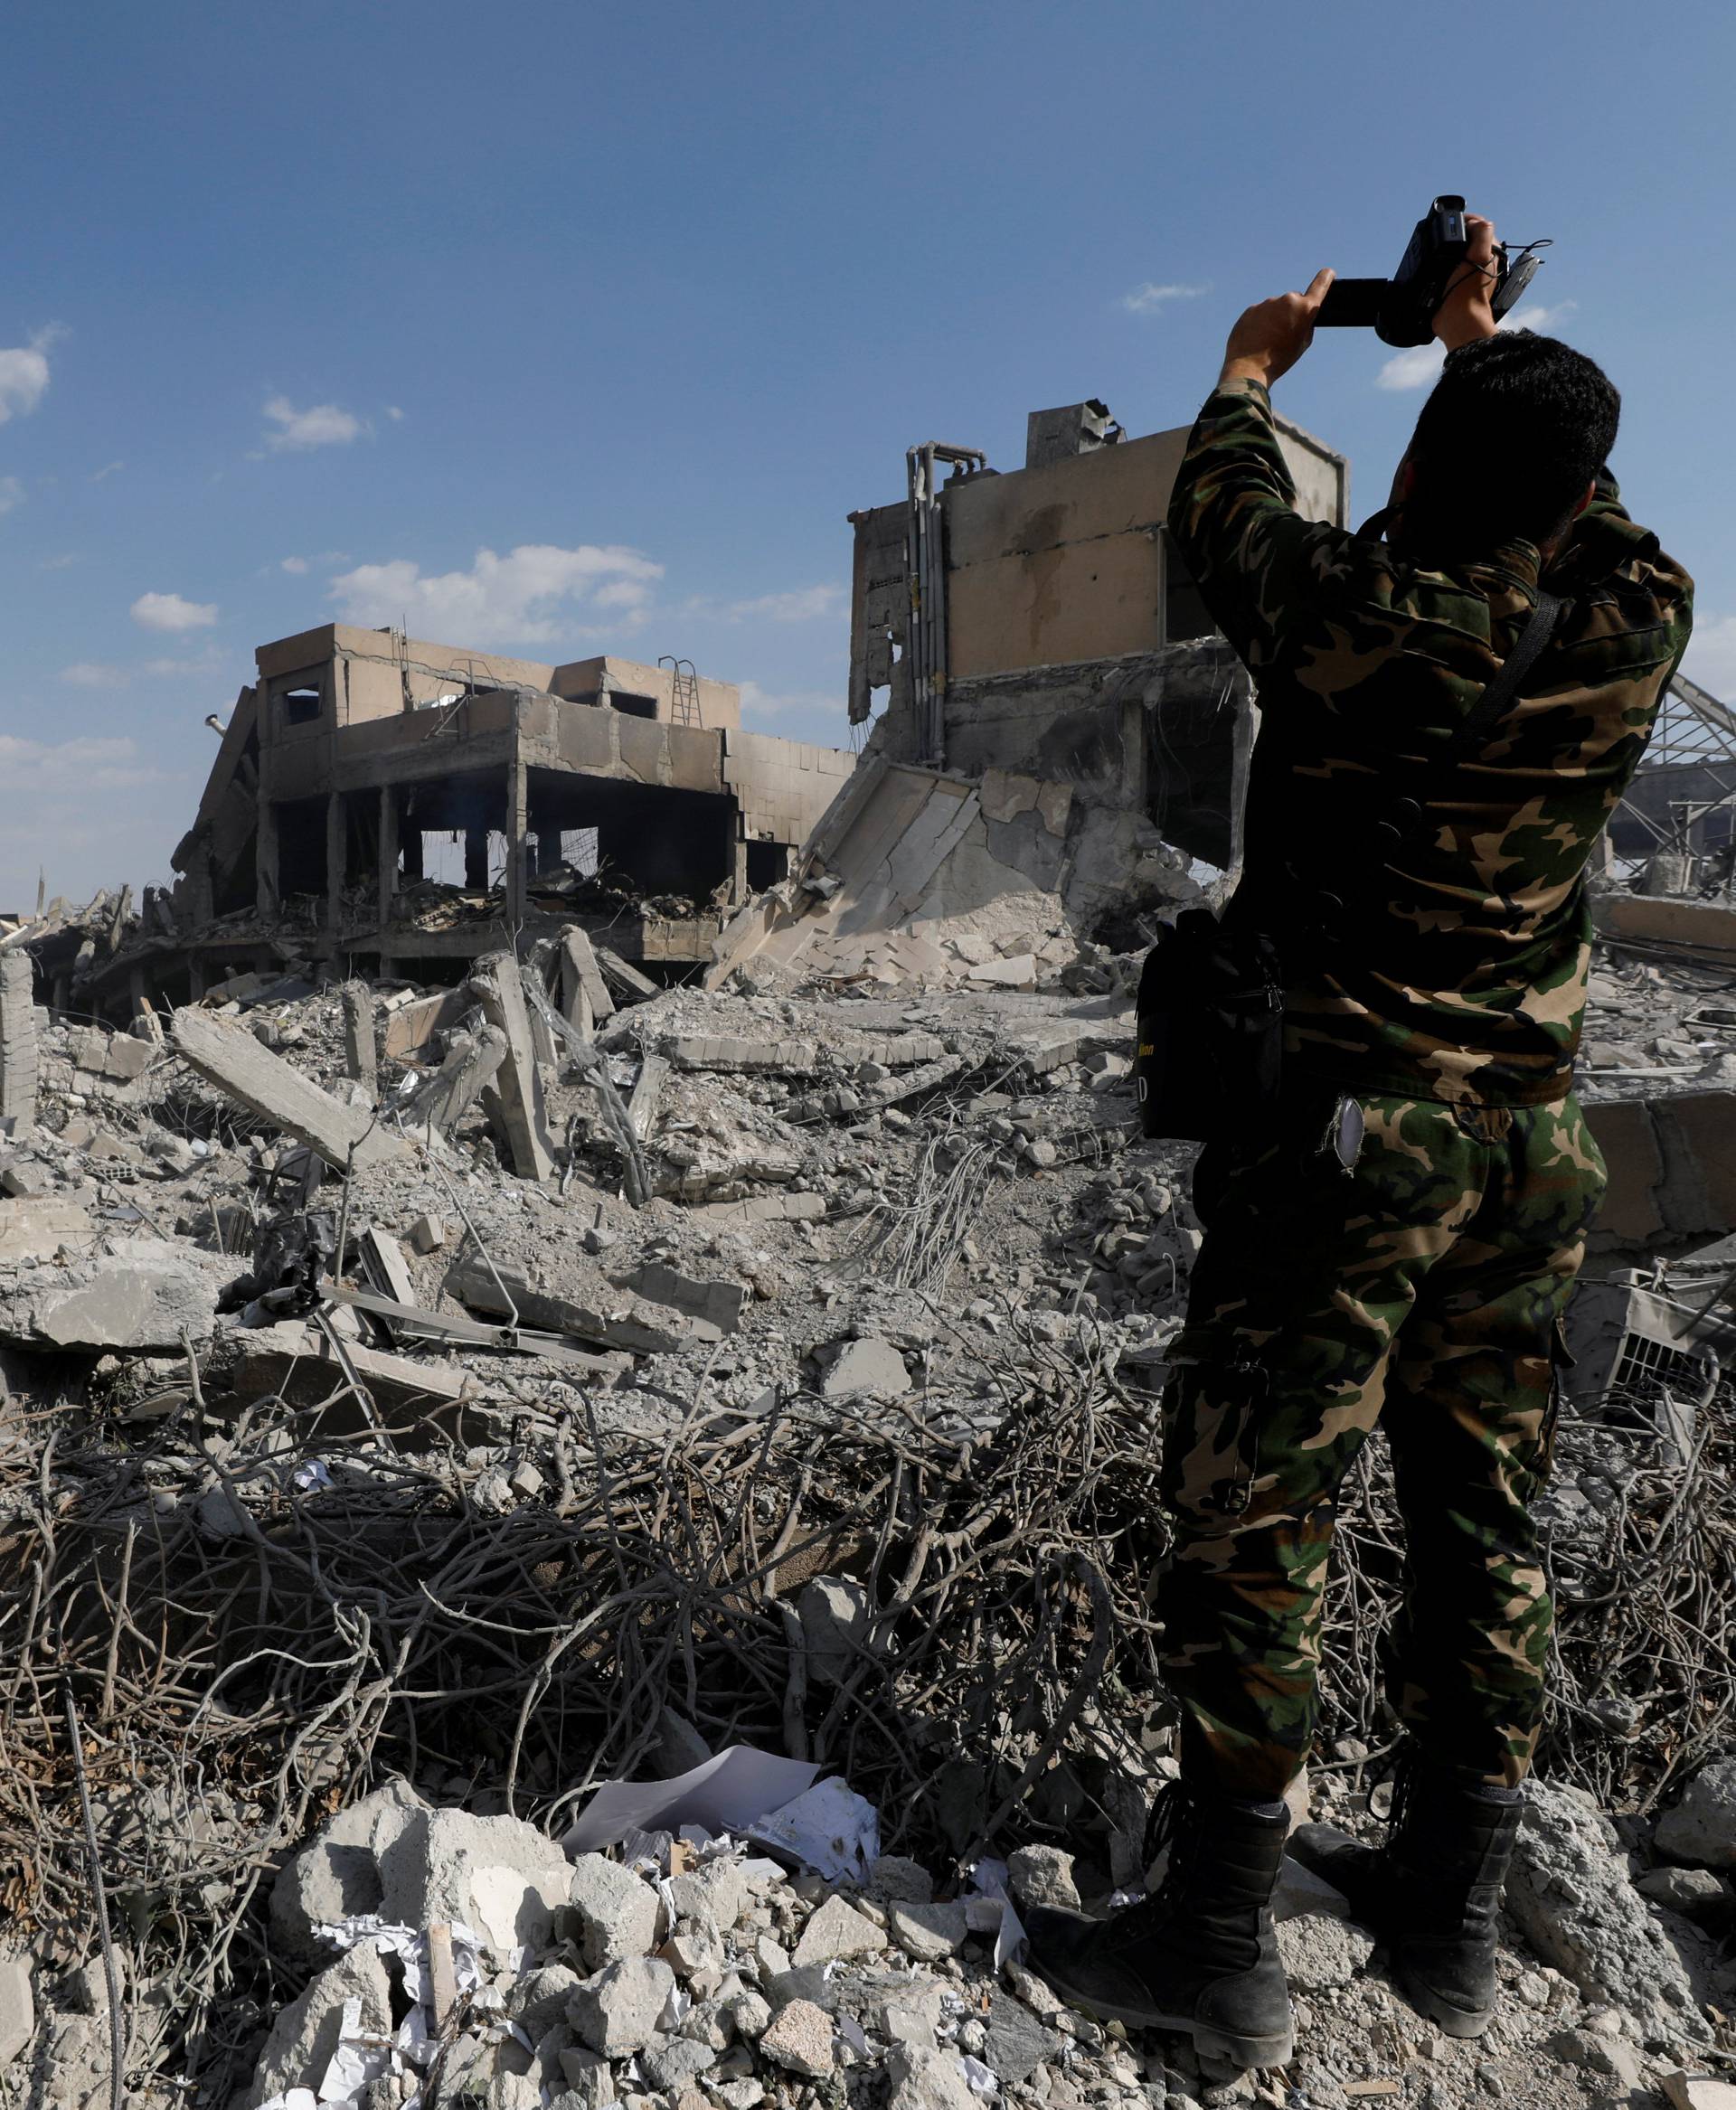 A Syrian military officer records a video inside the destroyed Scientific Research Centre in Damascus